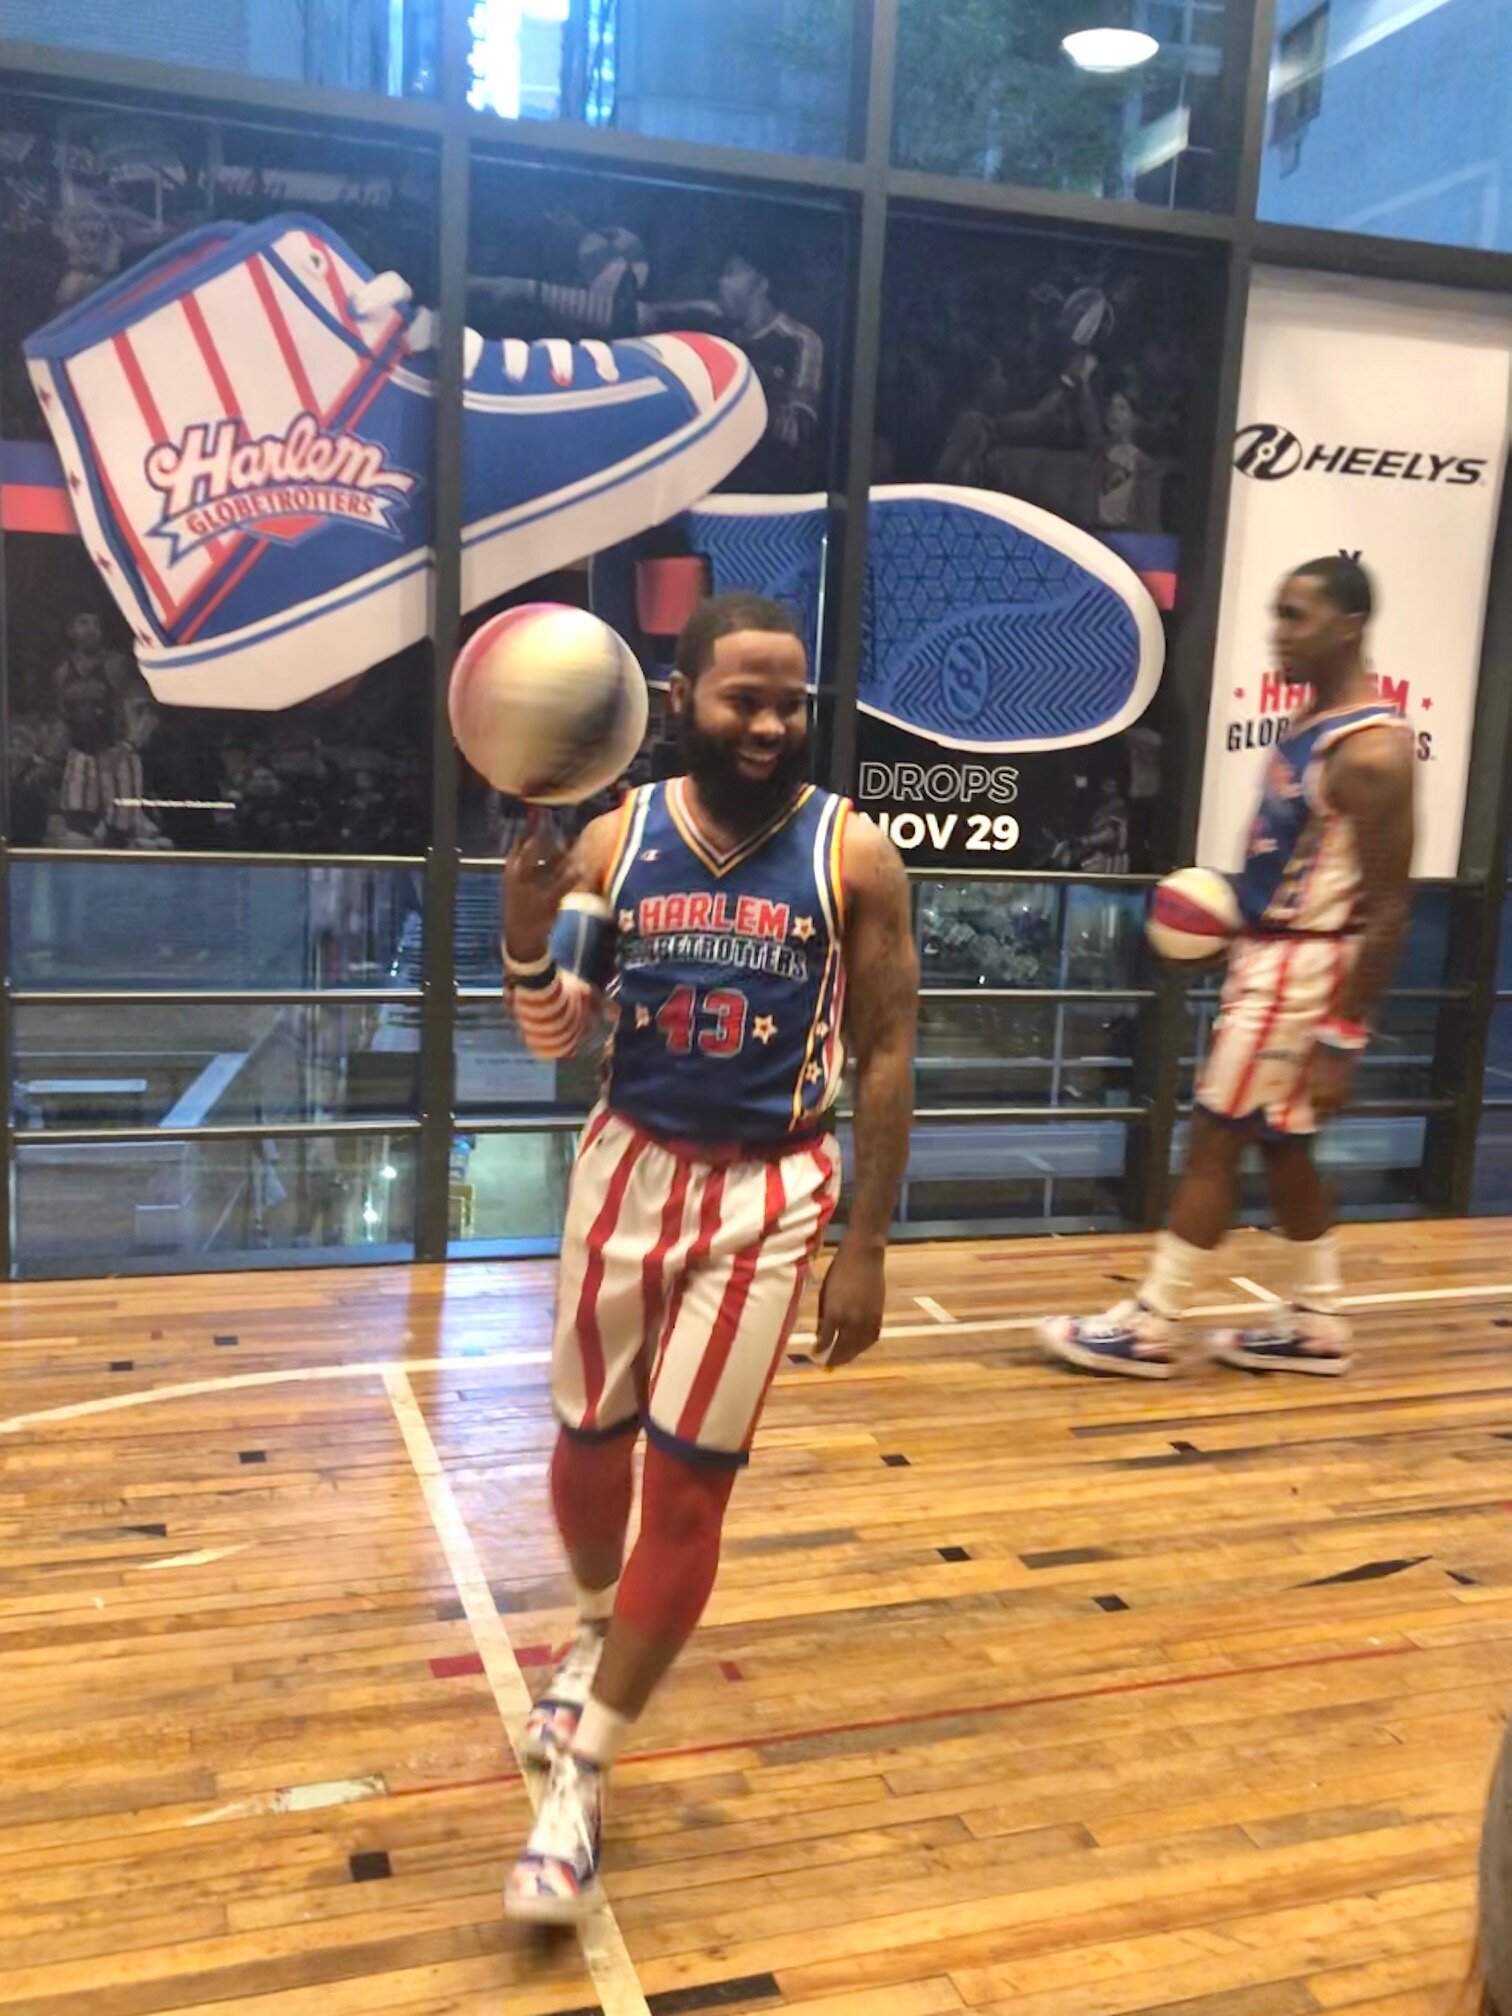 Shoes? For How About The Harlem Globetrotters?!? — espressofied